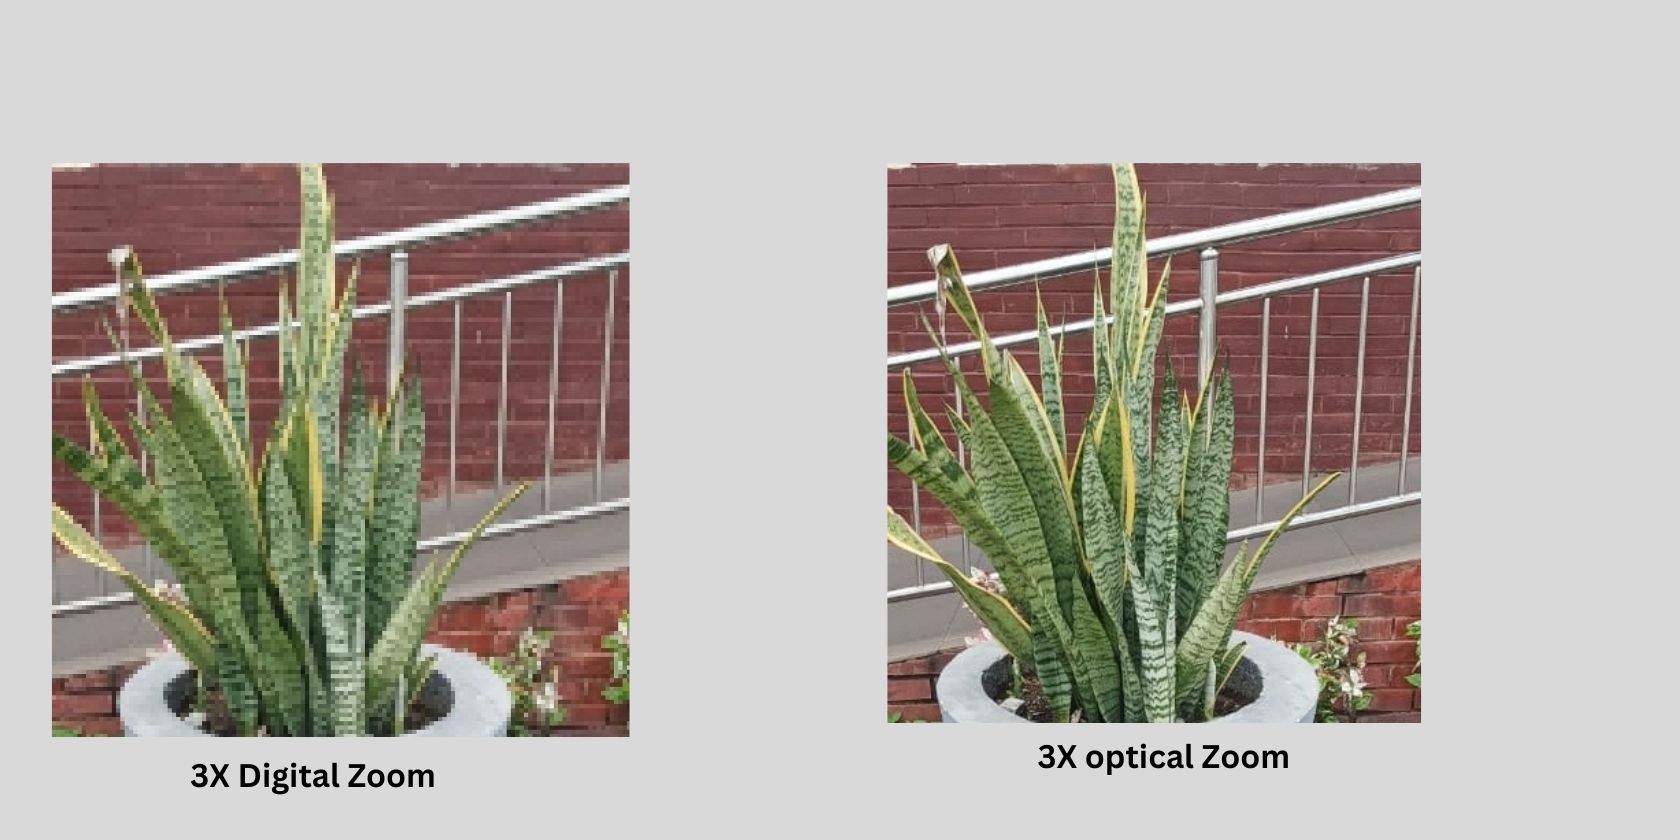 Comparing digital zoom to optical zoom on smartphones